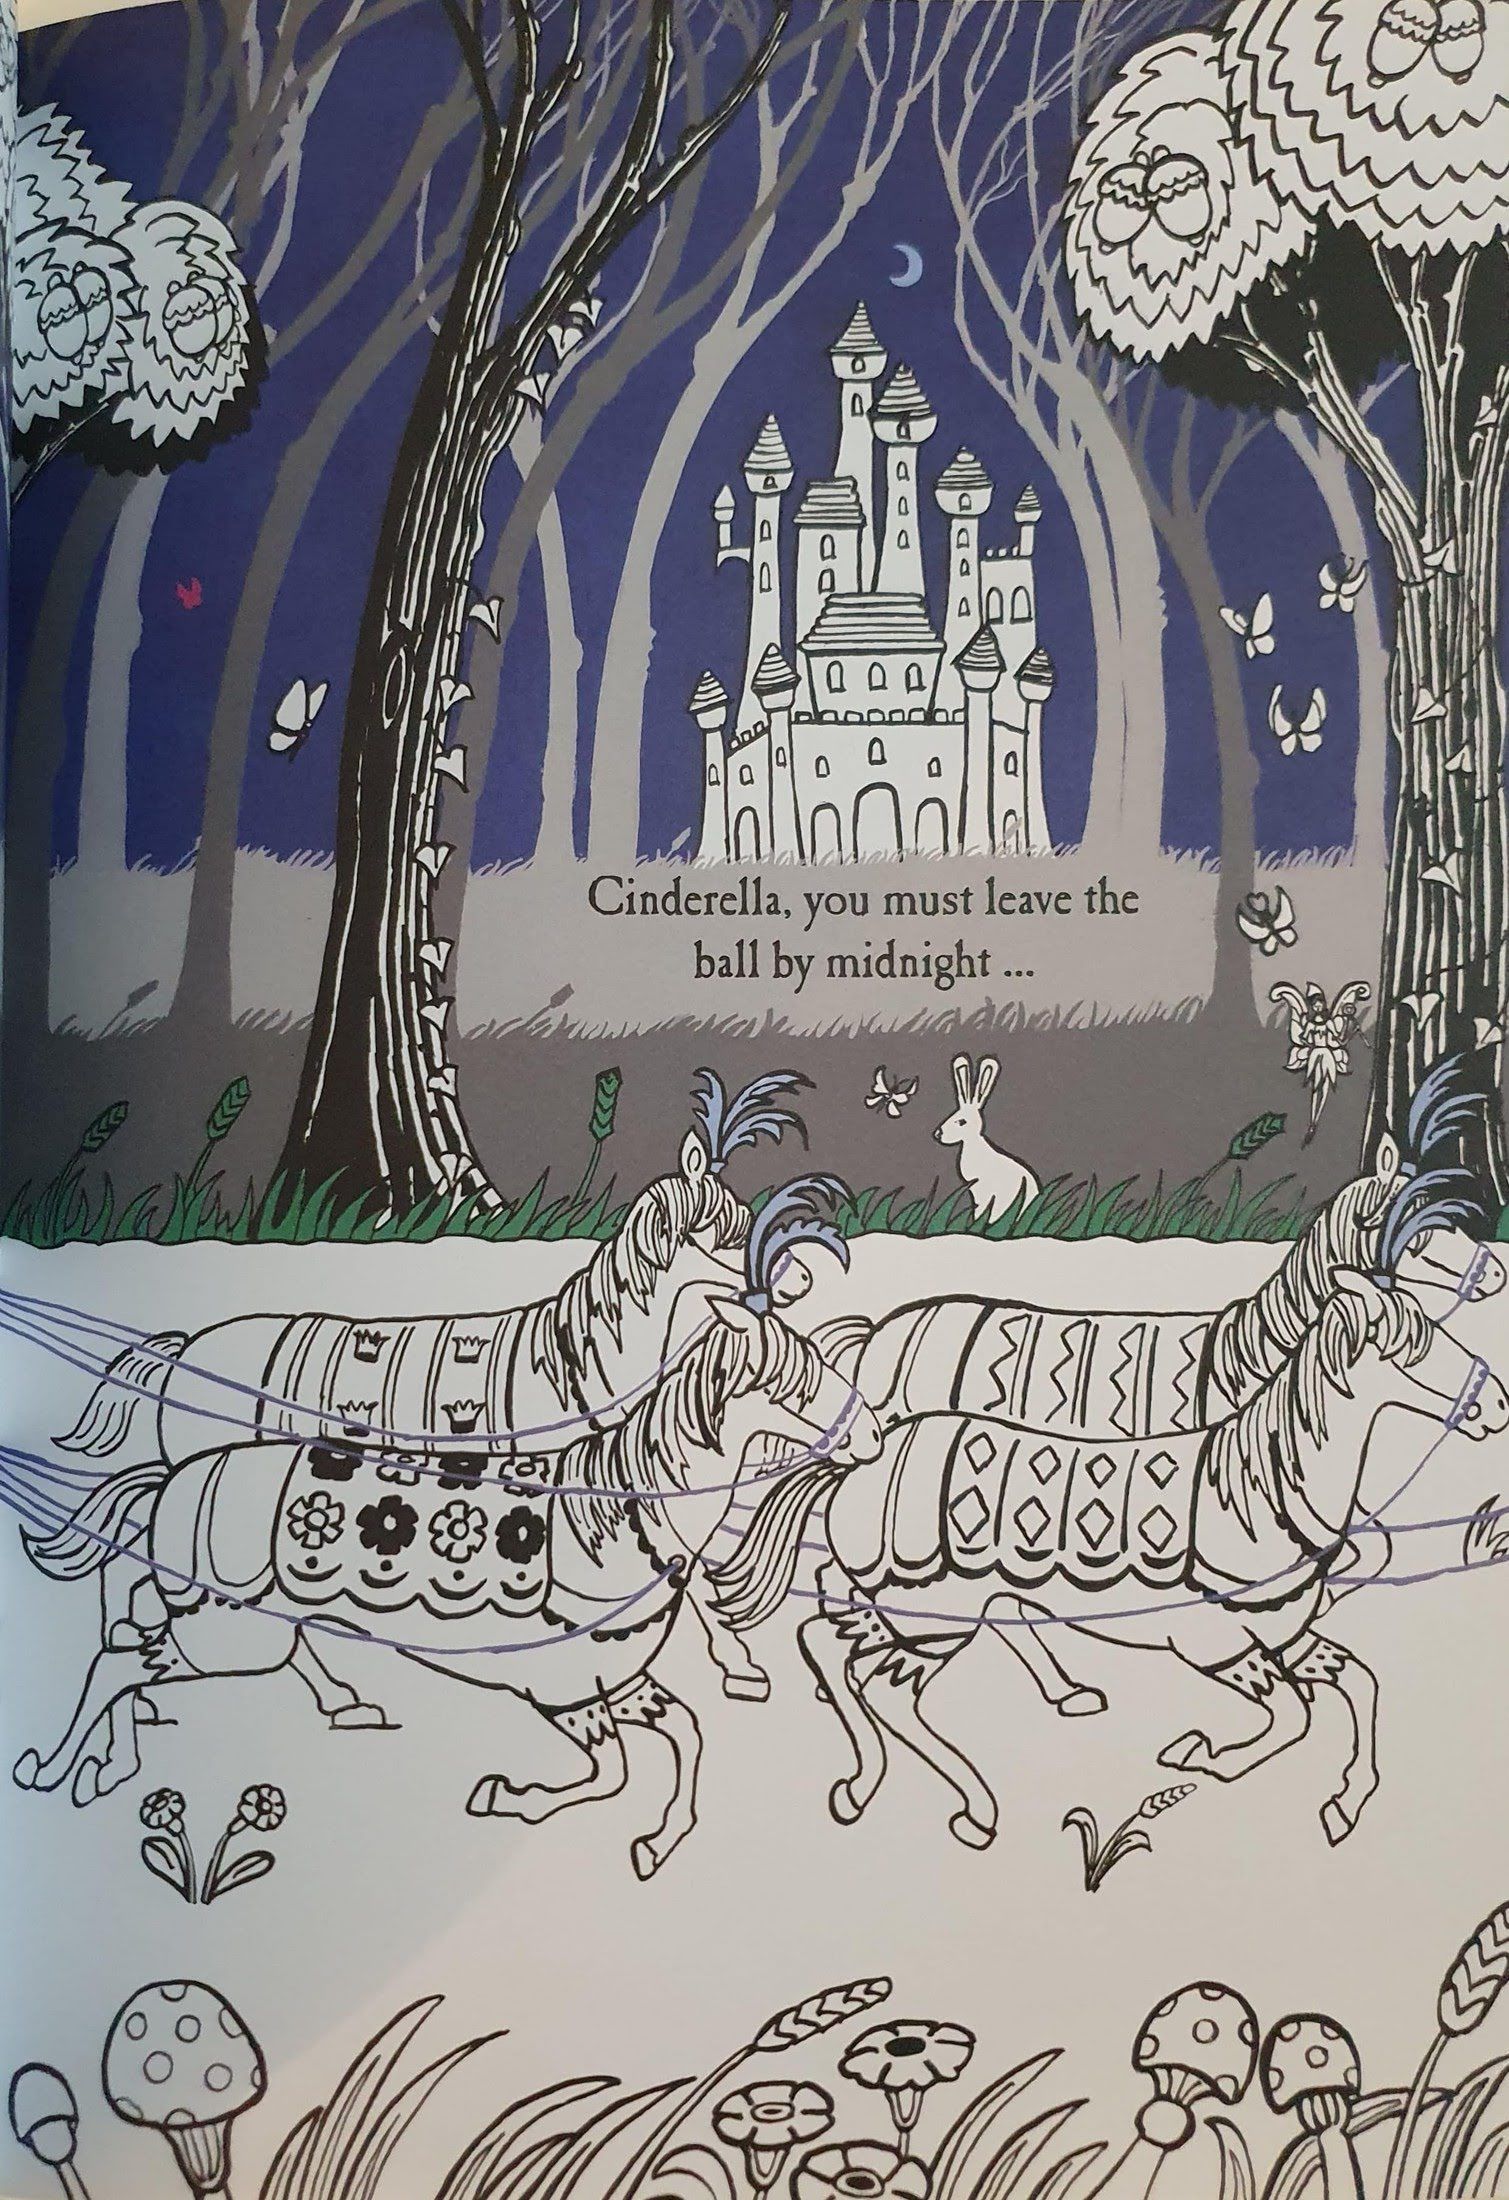 The Fairy Tale Colouring Book Like New Recuddles.ch  (6220823756985)